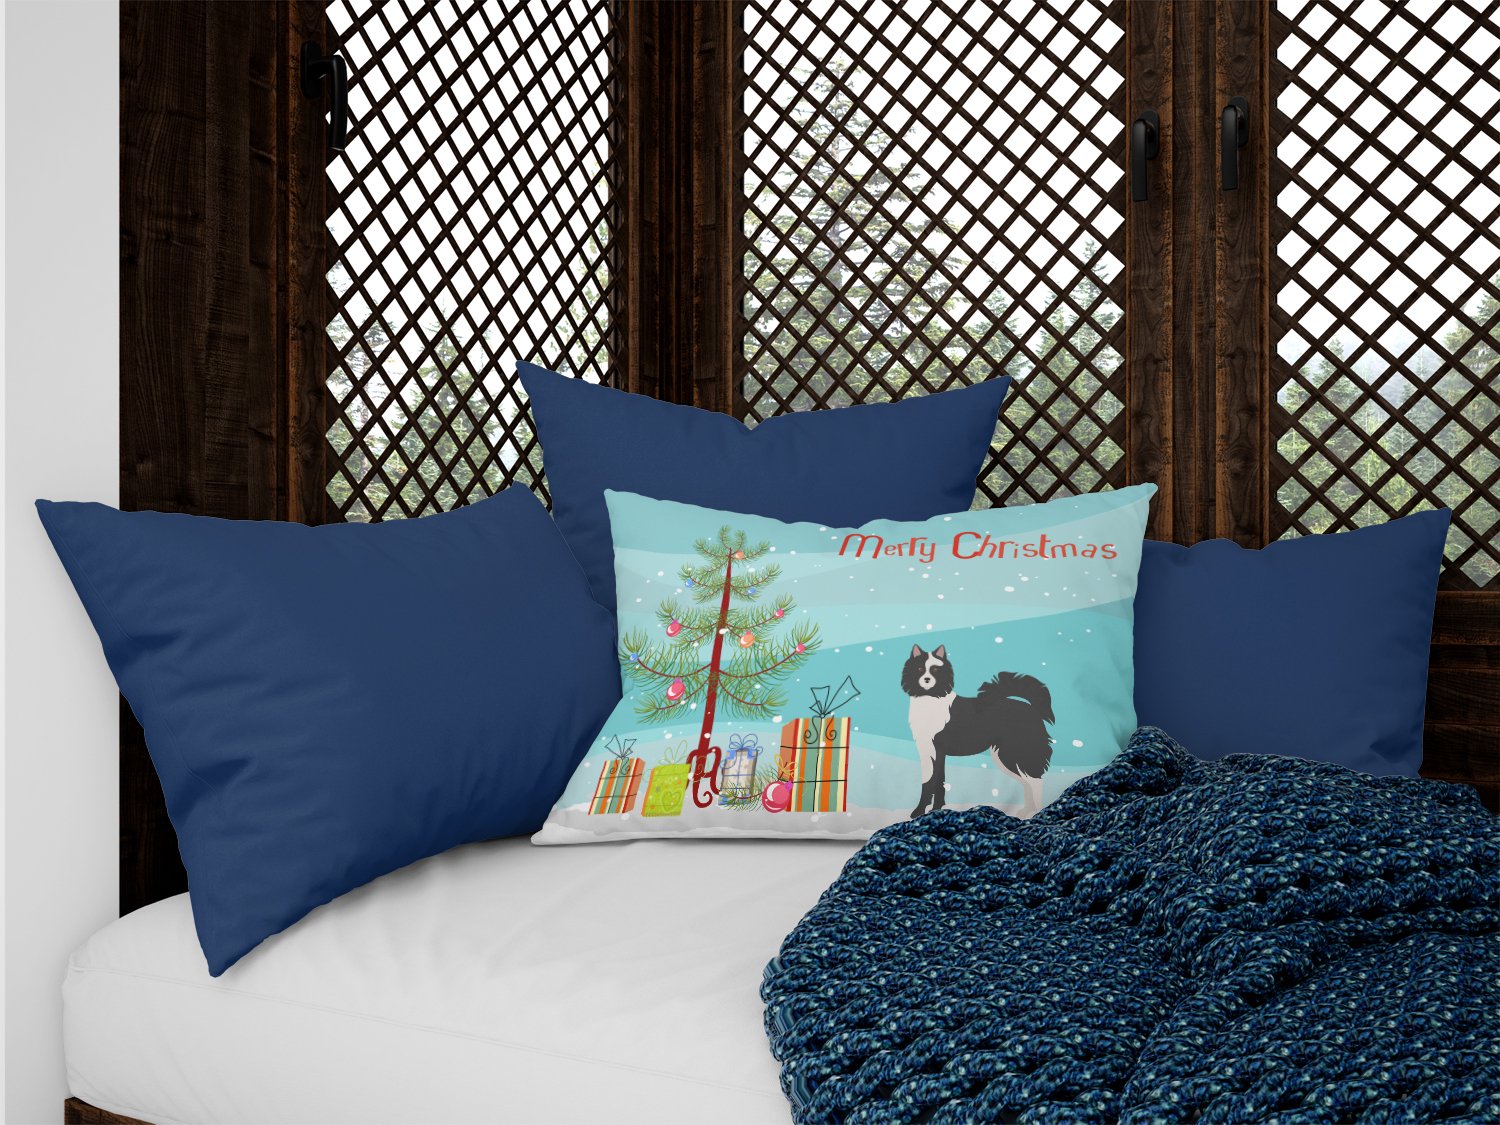 Black and White Elo dog Christmas Tree Canvas Fabric Decorative Pillow CK3452PW1216 by Caroline's Treasures